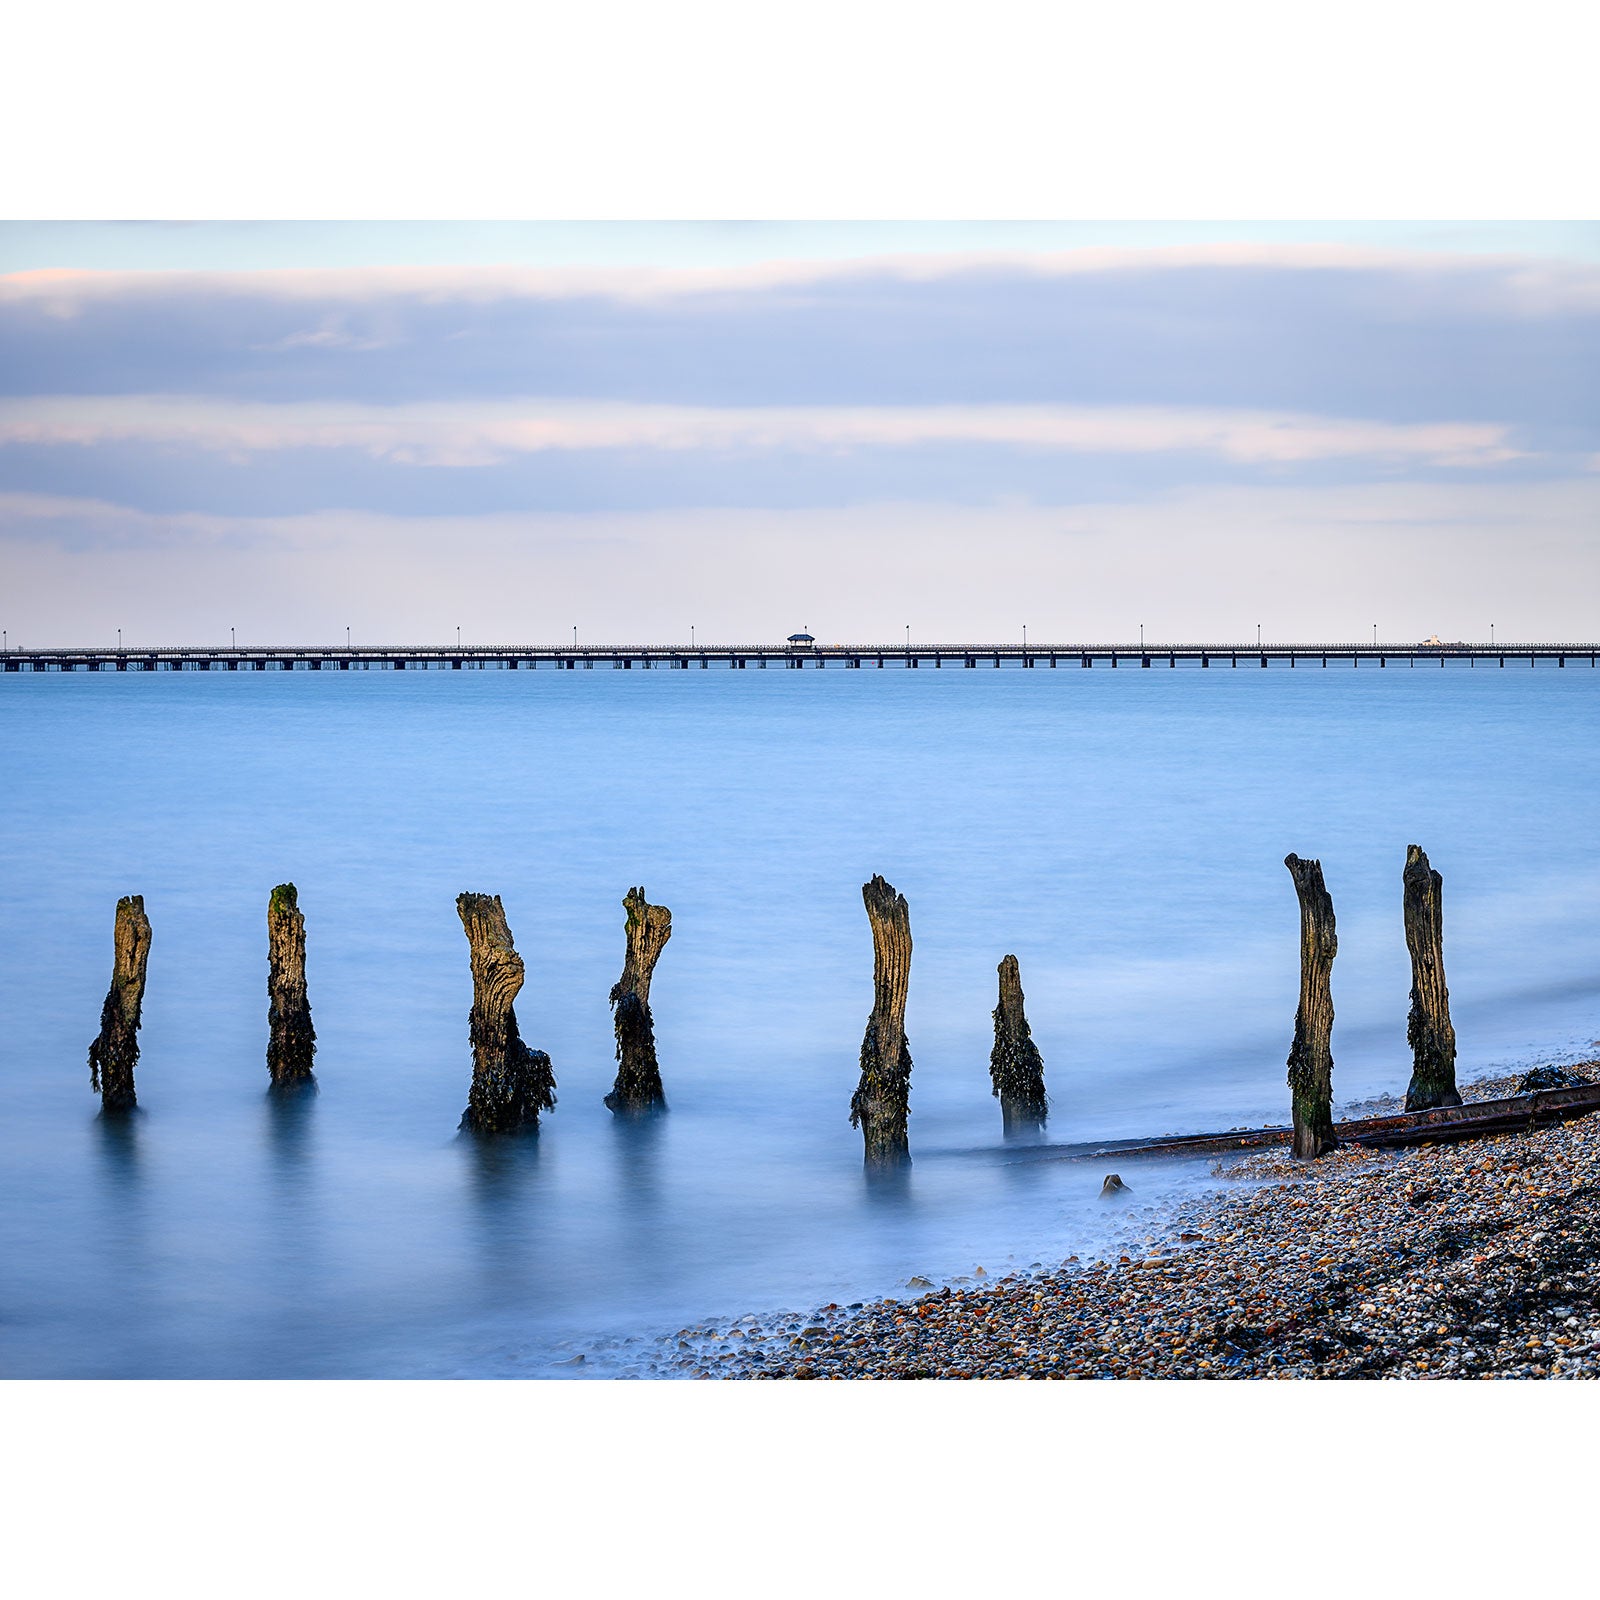 Old wooden pilings on a pebbly beach at the Isle of Wight with Ryde Pier in the background under a blue sky at dusk. (Photography by Available Light Photography)